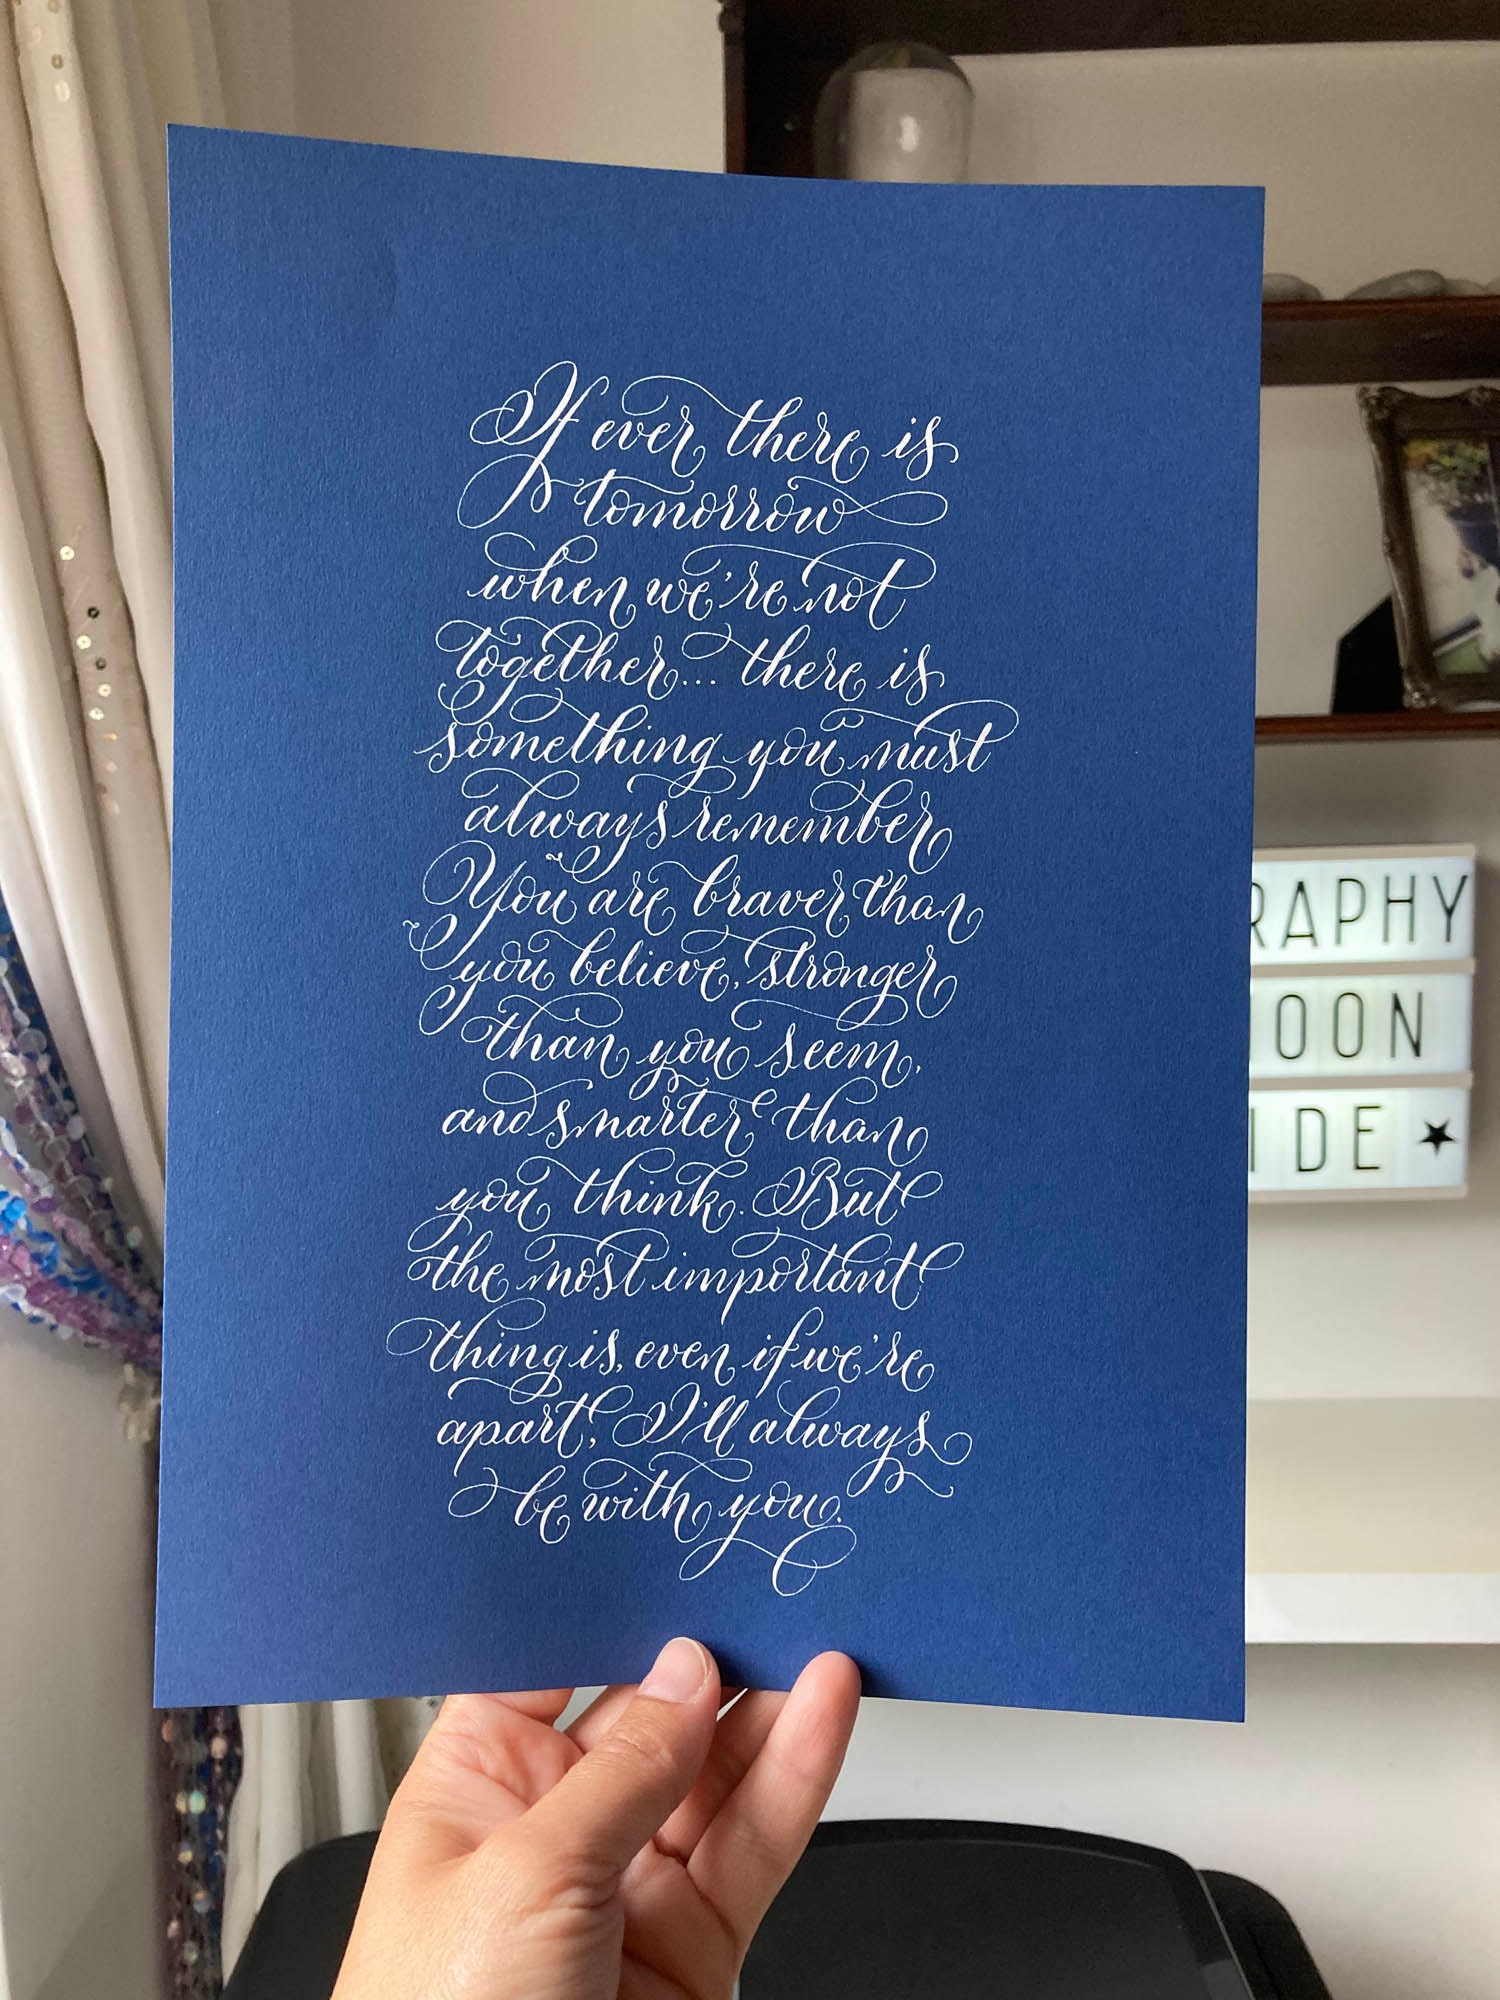 Calligraphy poem commission if ever there is tomorrow